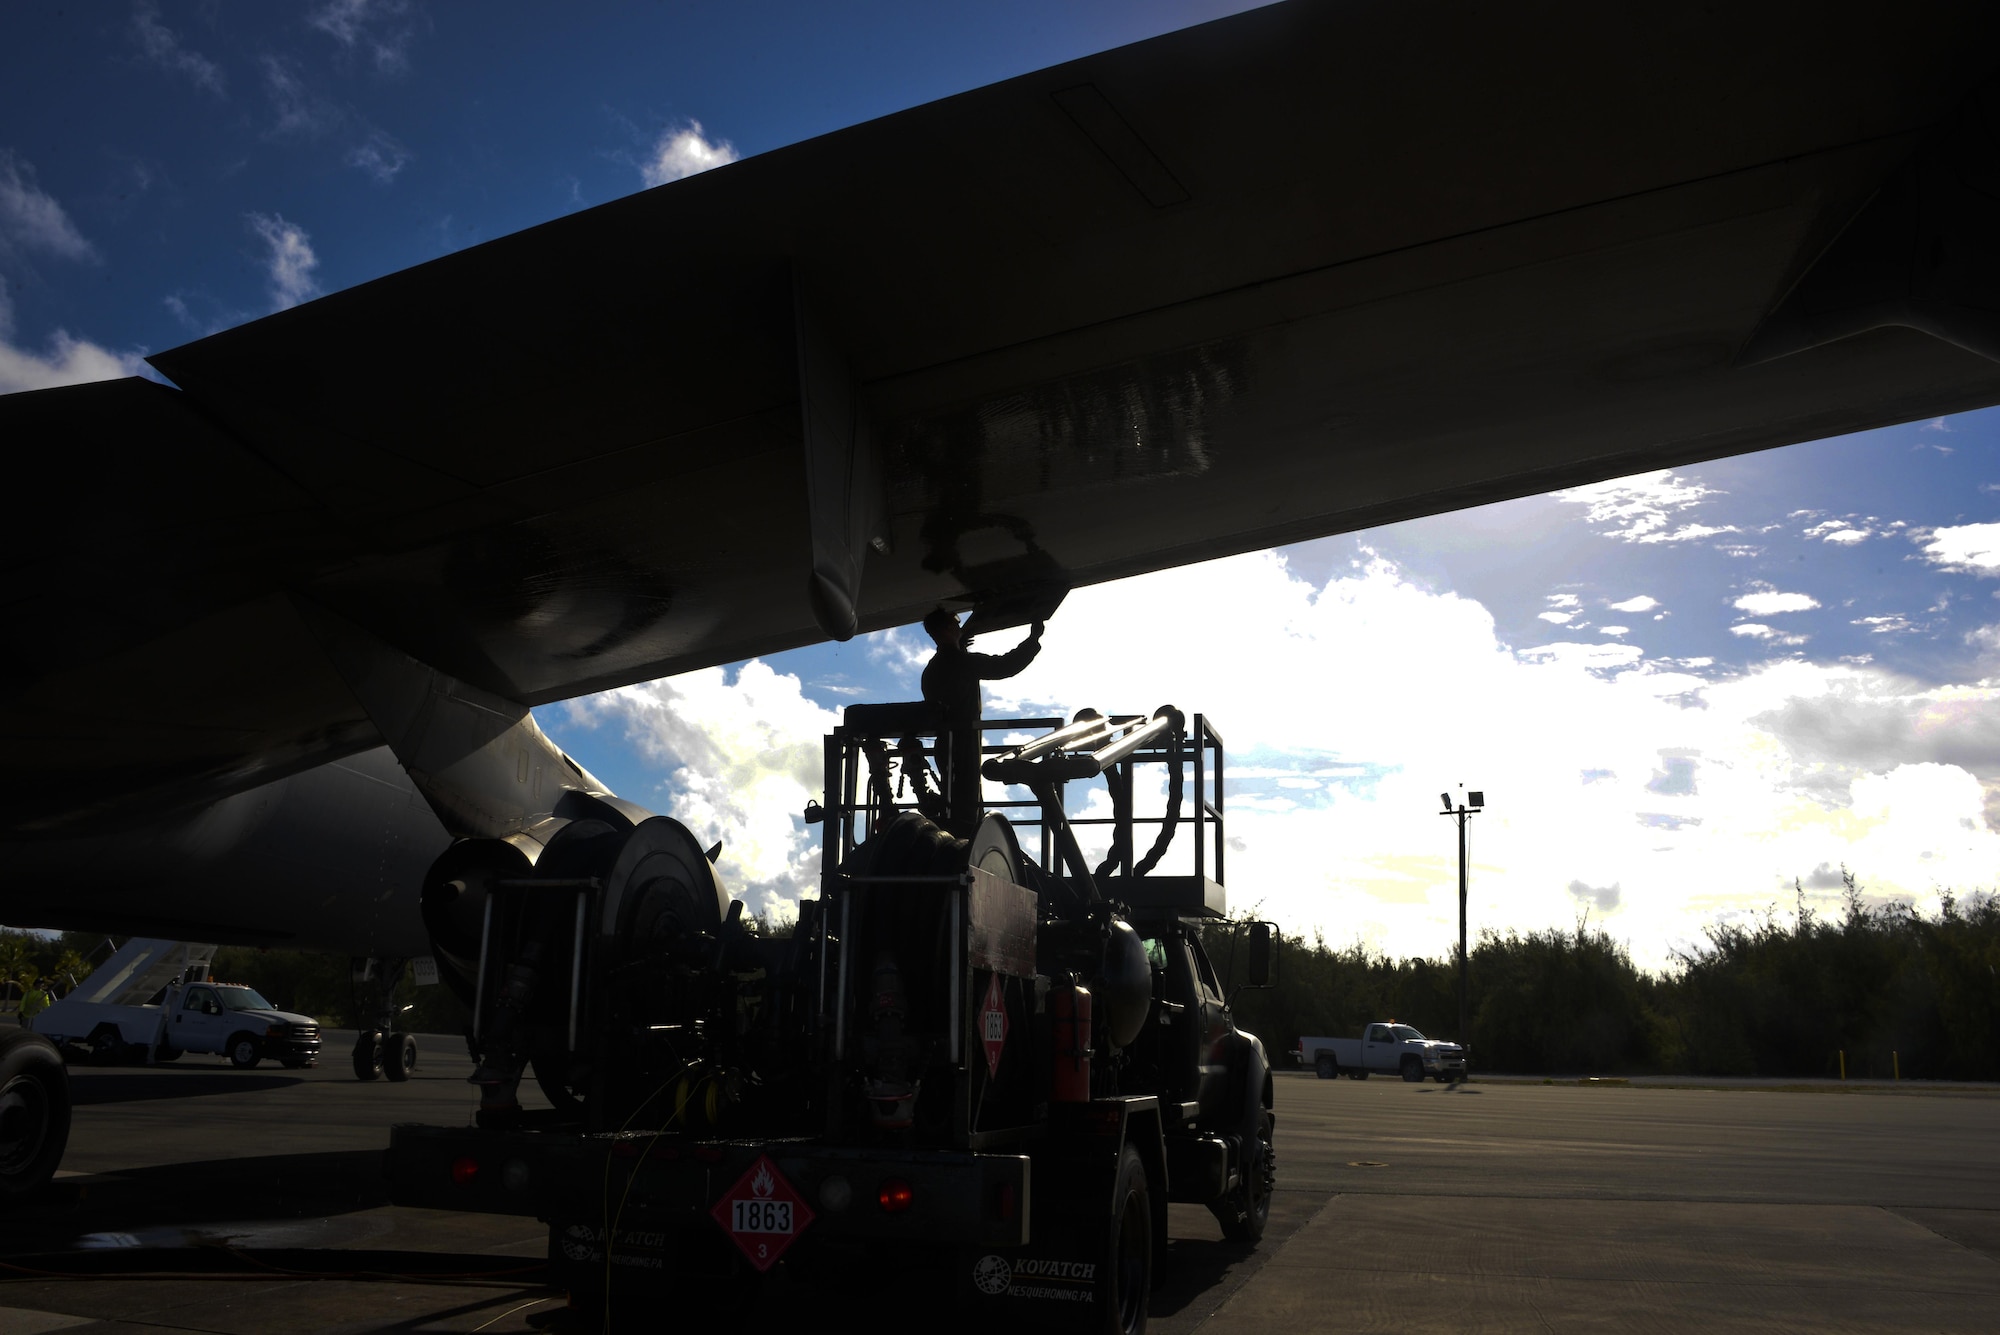 U.S. Air Force Staff Sgt. Jacob St. George, 660th Aircraft Maintenance Squadron crew chief, refuels a KC-10 Extender at Wake Island July 12, 2017. A combined crew from the 6th and 9th ARS at Travis supported Exercise Talisman Saber 2017 by executing Exercise Ultimate Reach, a strategic refueling and airdrop mission in which three KC-10s refueled five C-17 Globemaster IIIs carrying U.S. Army, Australian and Canadian paratroopers prior to an airdrop. TS 17 is a biennial exercise in Australia that focuses on bilateral military training between U.S. Pacific Command forces and the Australian Defence Forces to improve U.S.-Australia combat readiness, increase interoperability, maximize combined training opportunities and conduct maritime prepositioning and logistics operations in the Pacific. (U.S. Air Force photo by 2nd Lt. Sarah Johnson)